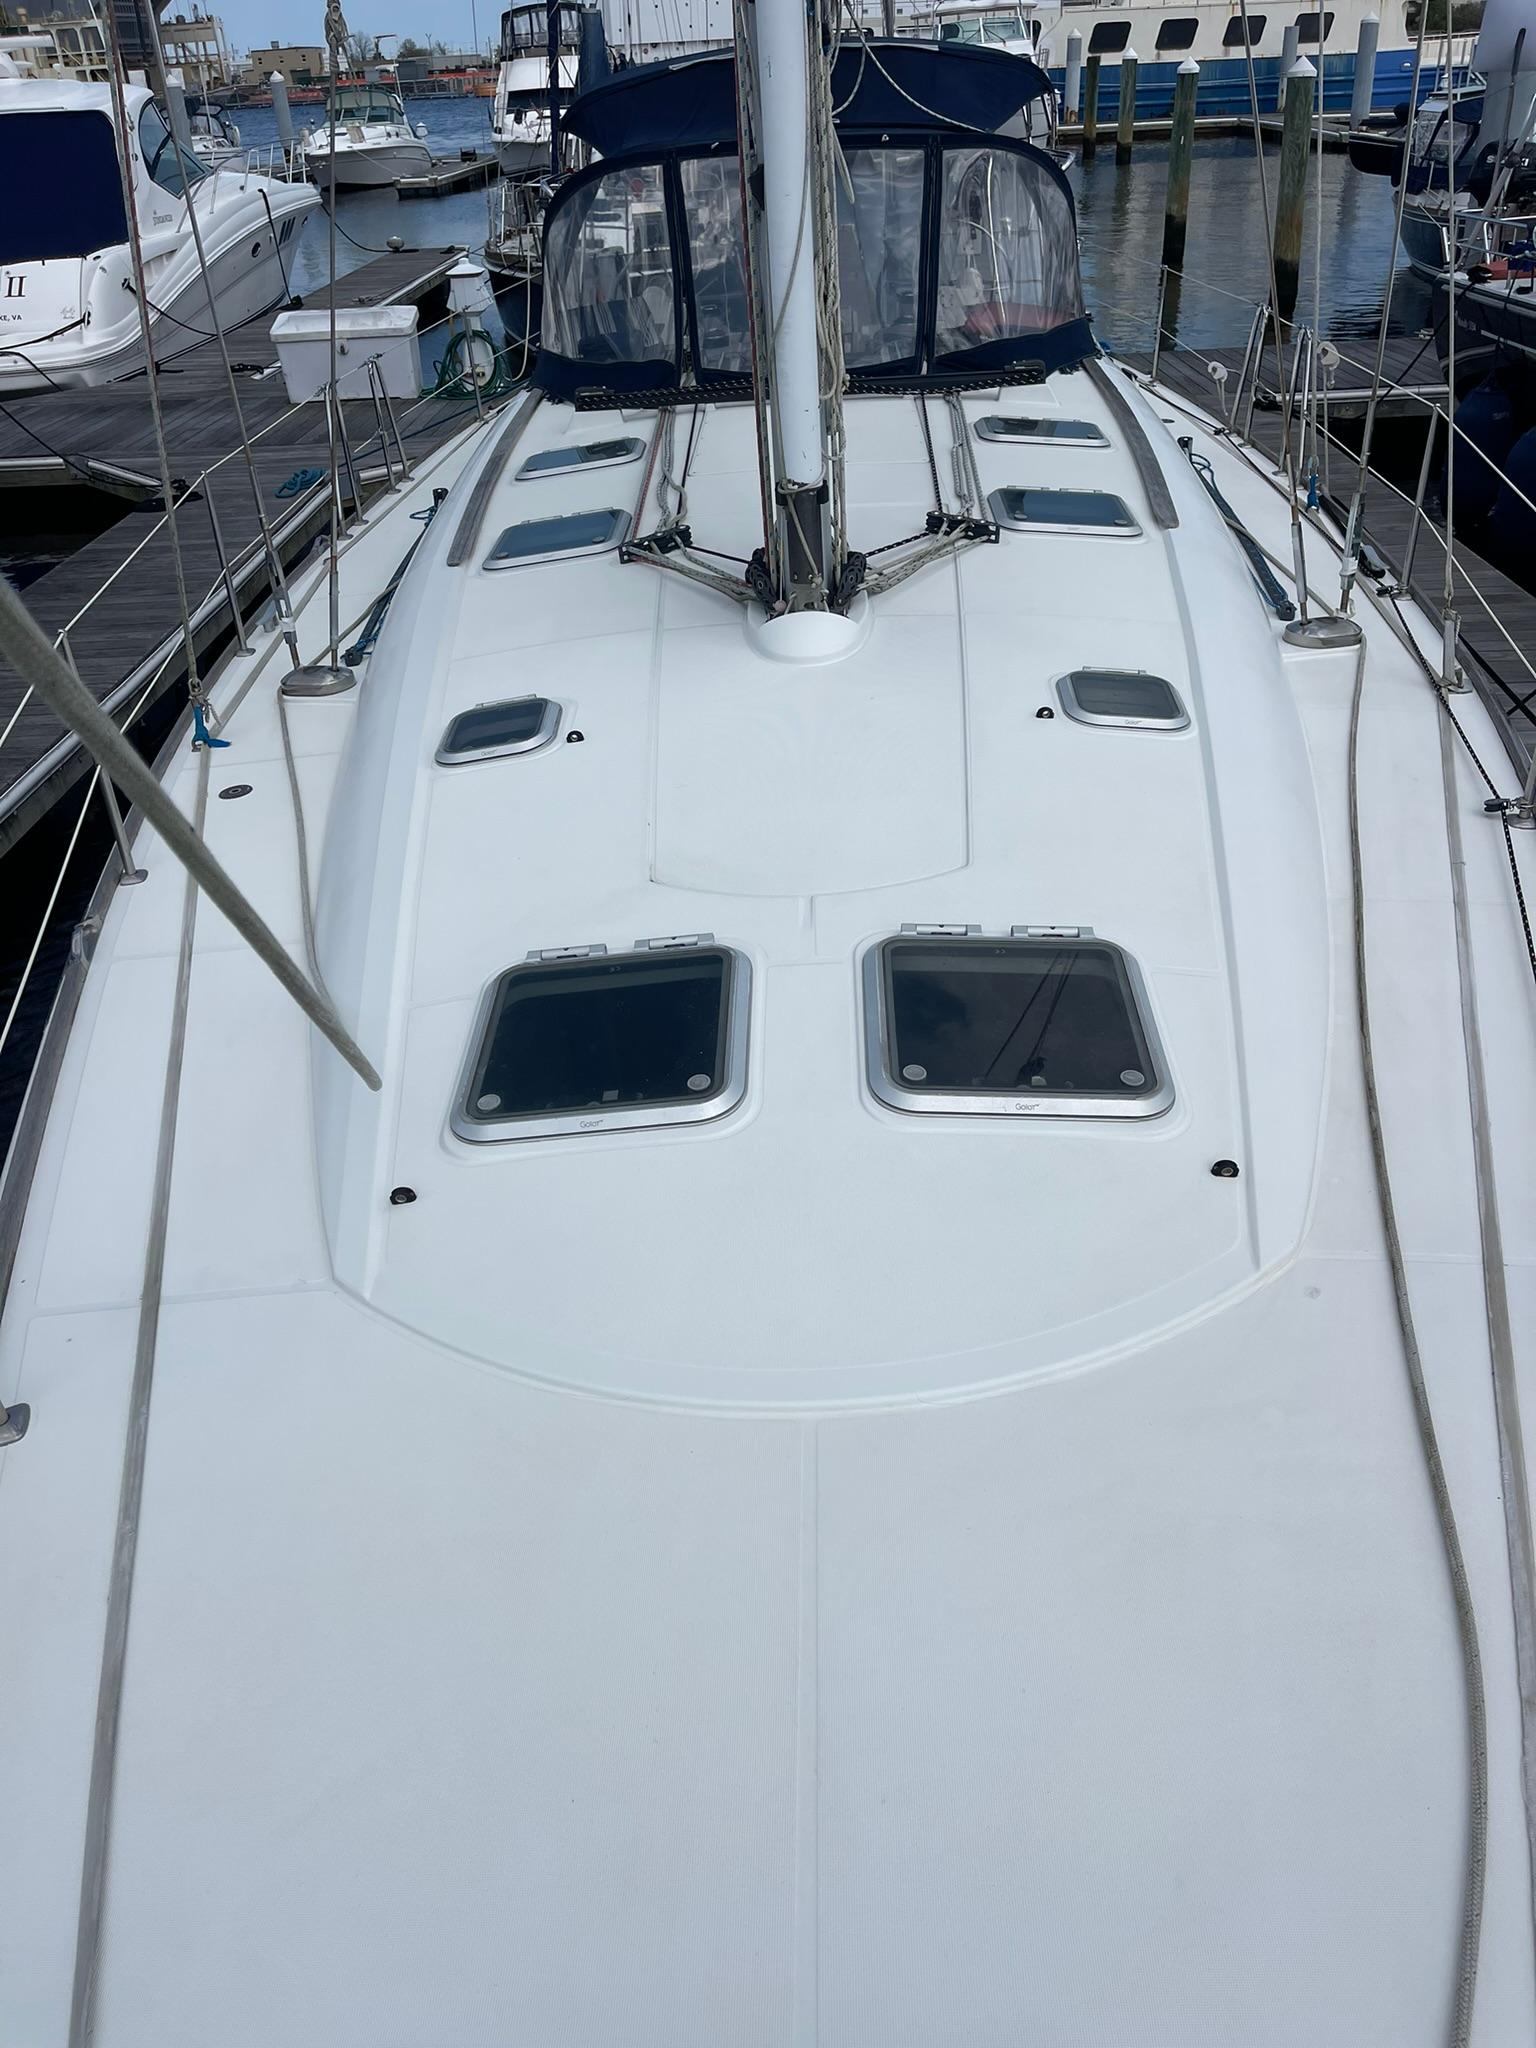 FOREDECK LOOKING AFT